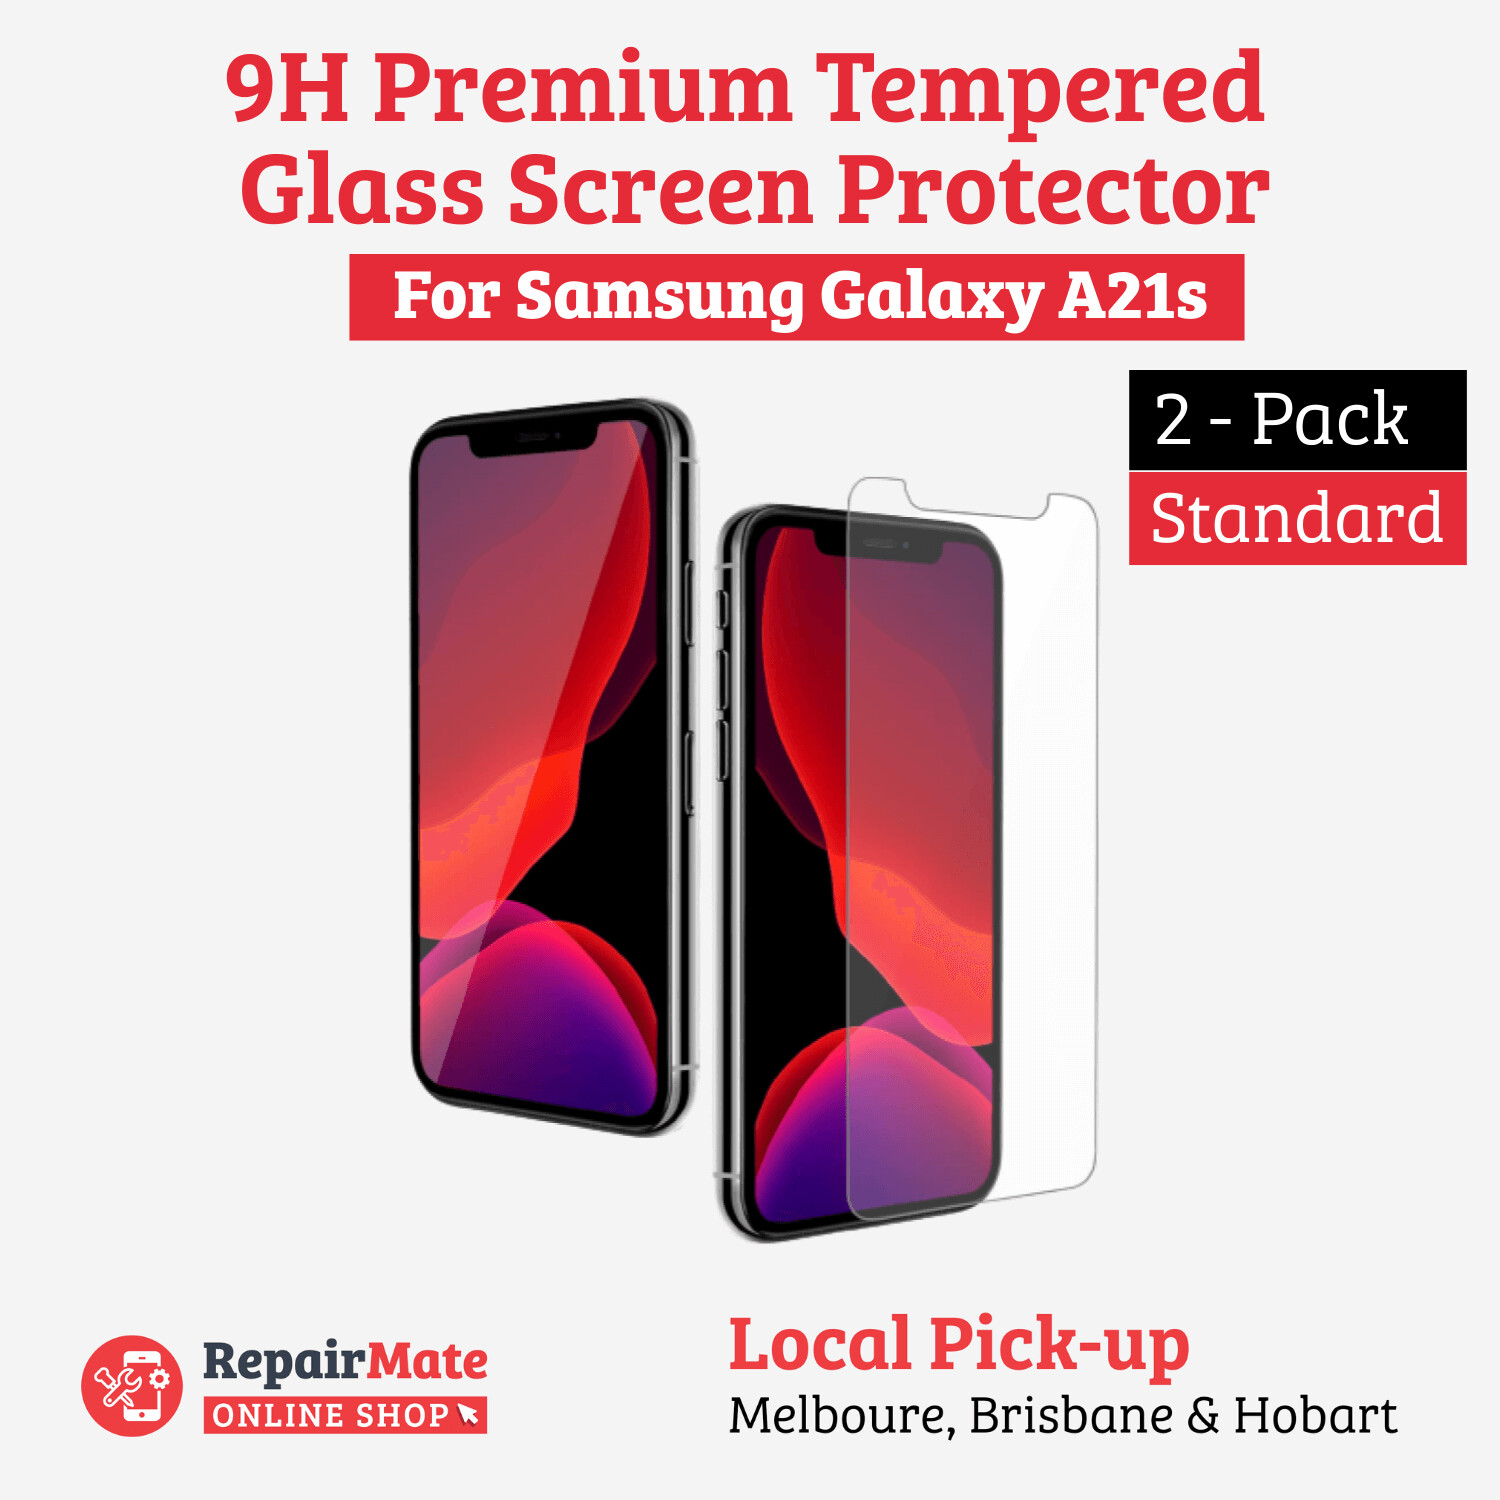 Samsung Galaxy A21S 9H Premium Tempered Glass Screen Protector [2 Pack]